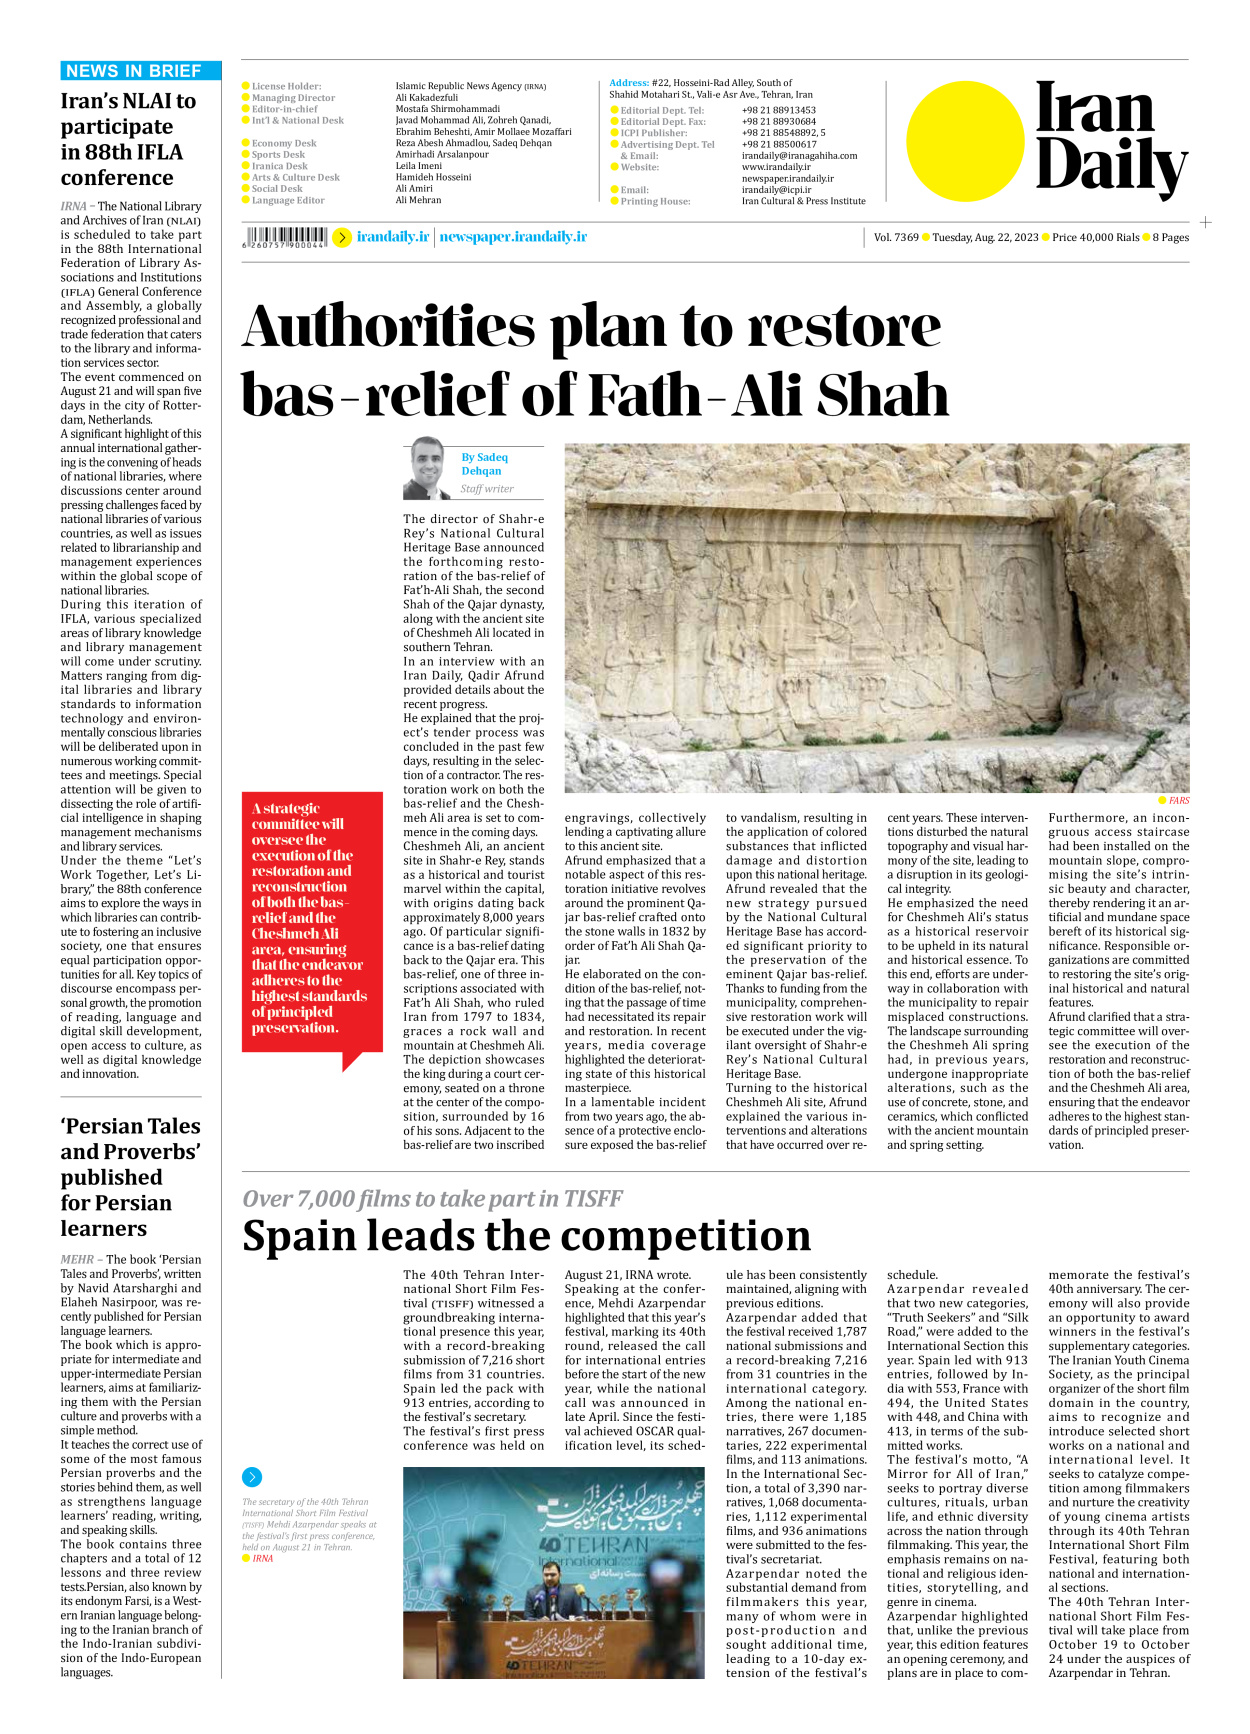 Iran Daily - Number Seven Thousand Three Hundred and Sixty Nine - 22 August 2023 - Page 8